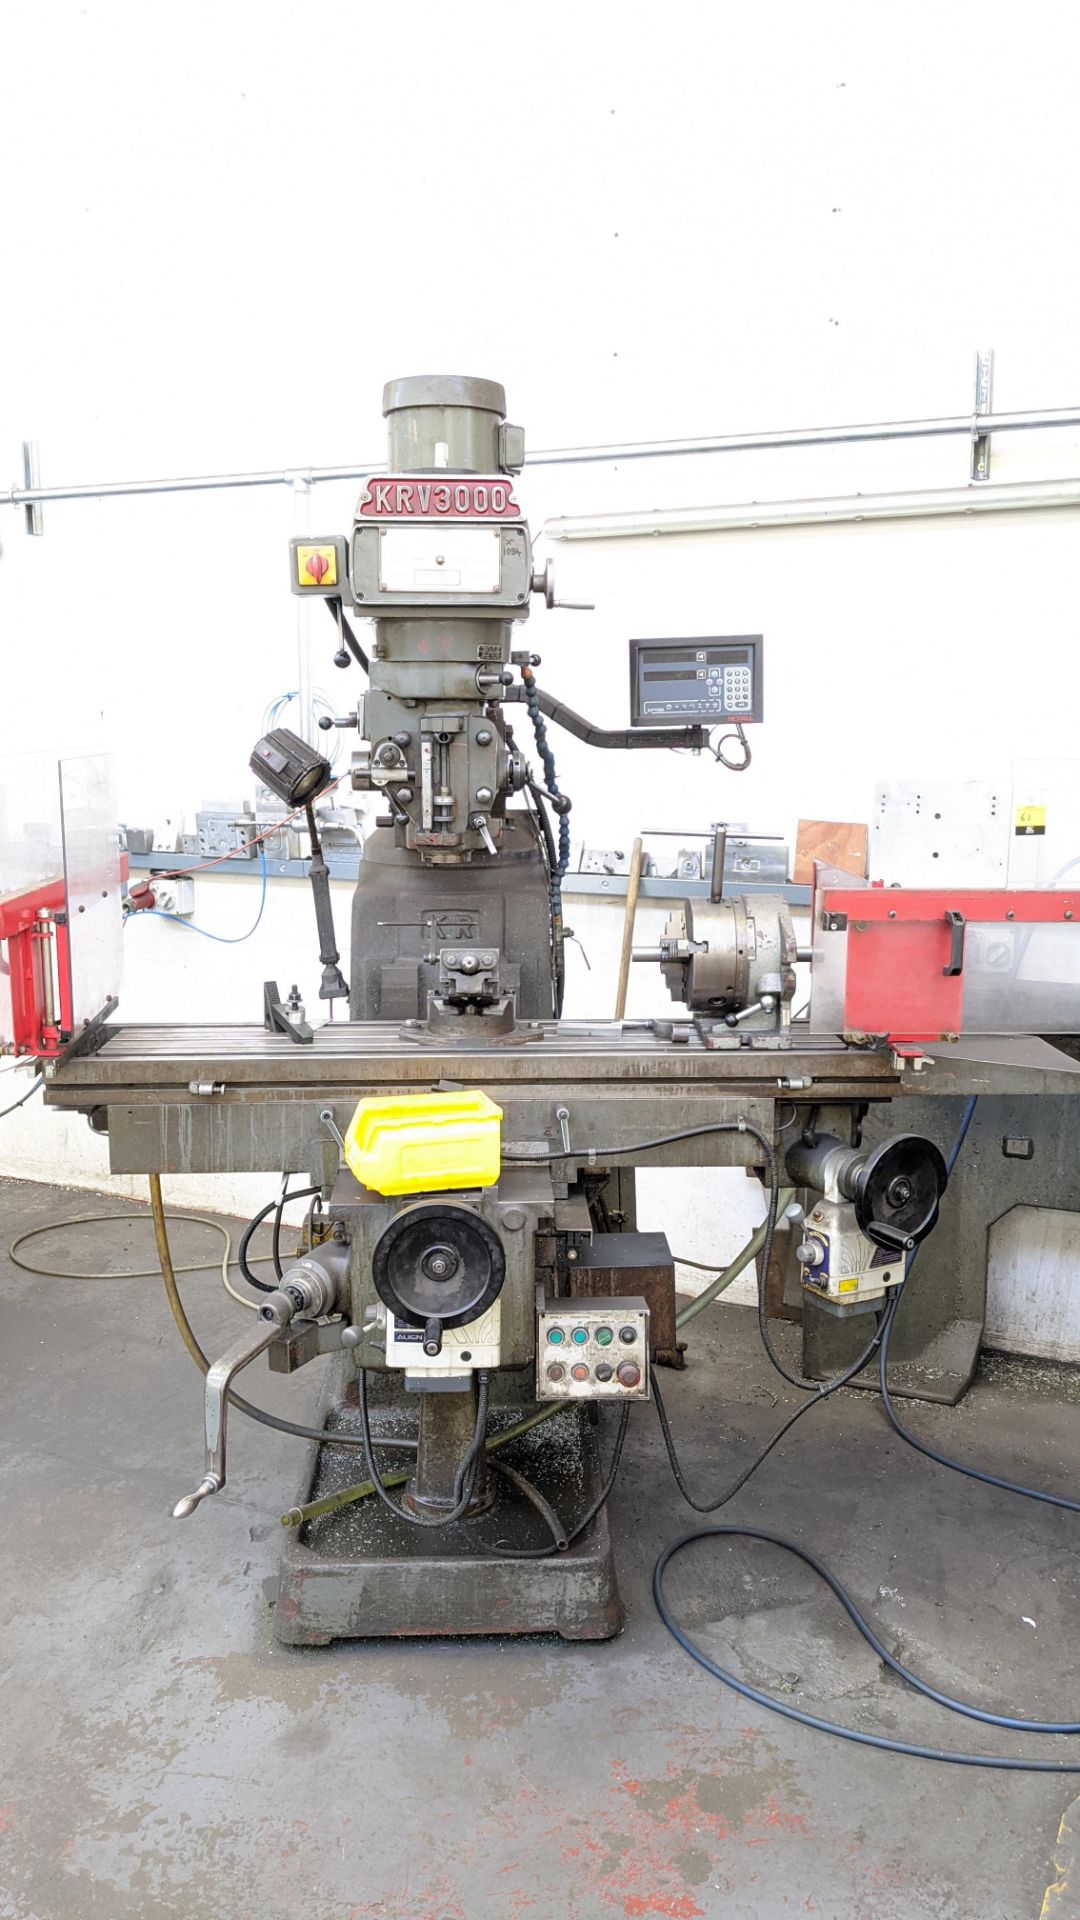 King Rich KRV3000-SLV milling machine with Newall DP700 controller including tooling/ancillary items - Image 15 of 15